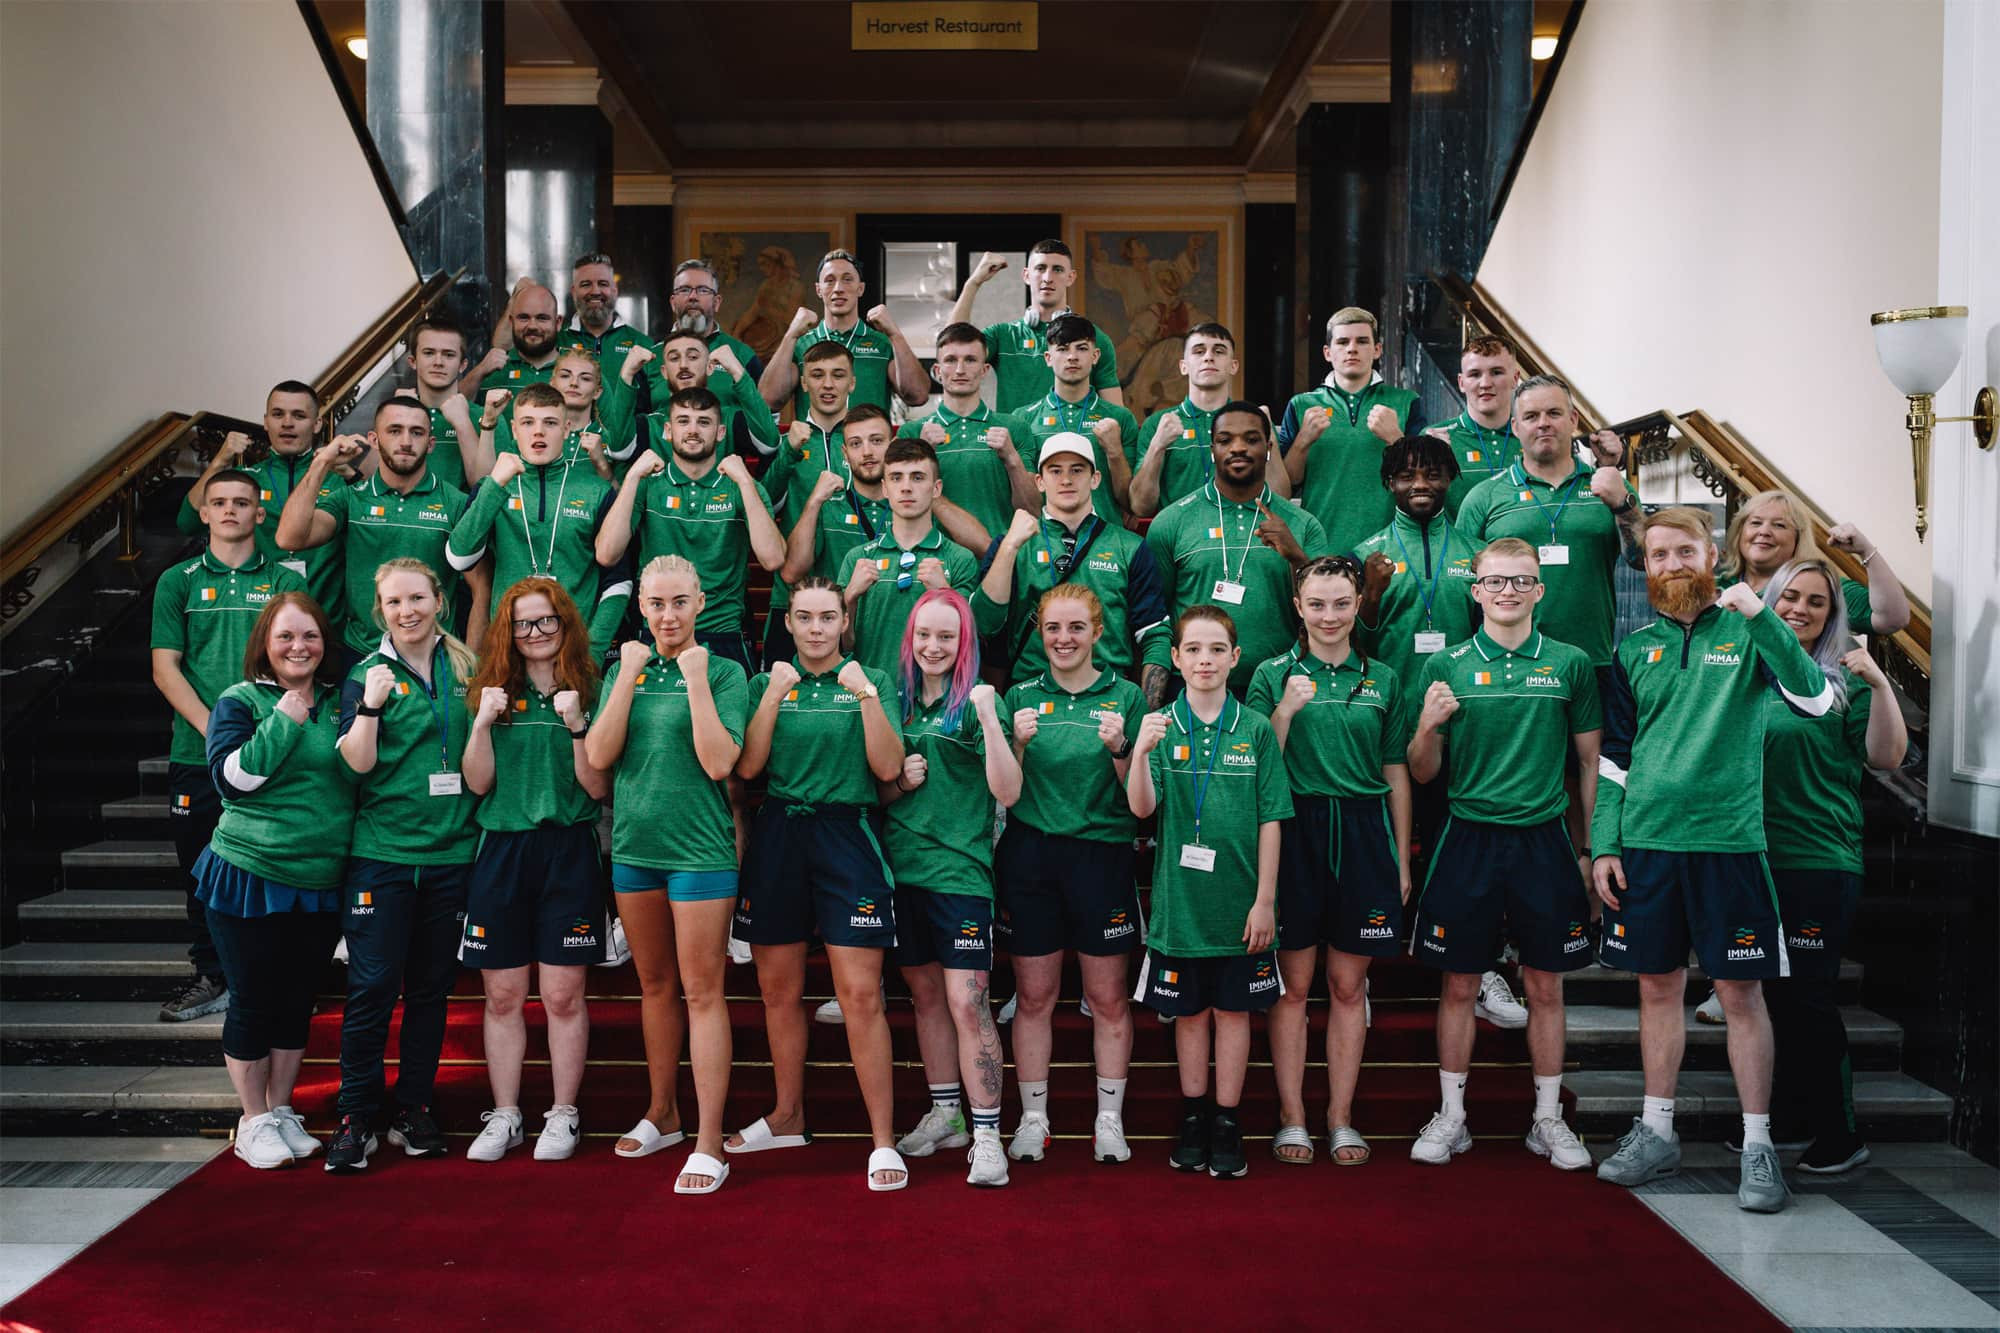 A united Irish team will expect to win multiple medals at the IMMAF World Championships ©IMMAF